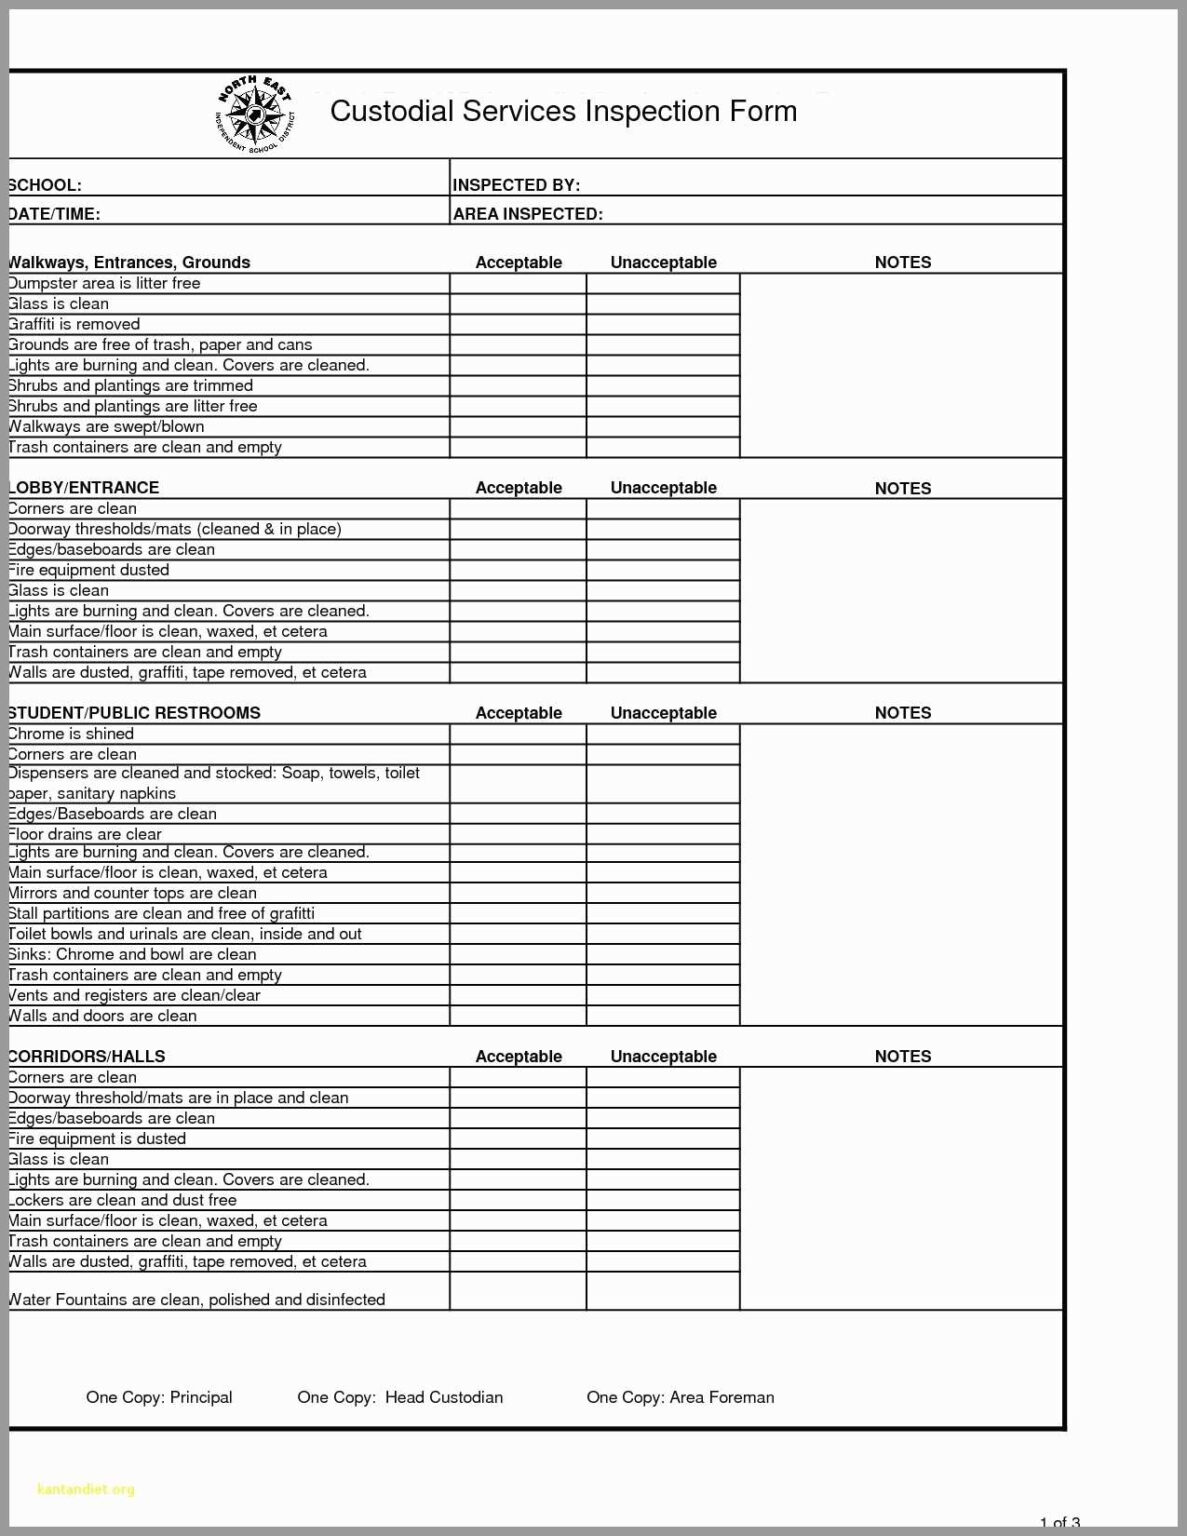 022-blank-checklist-template-word-home-inspection-intended-for-vehicle-checklist-template-word